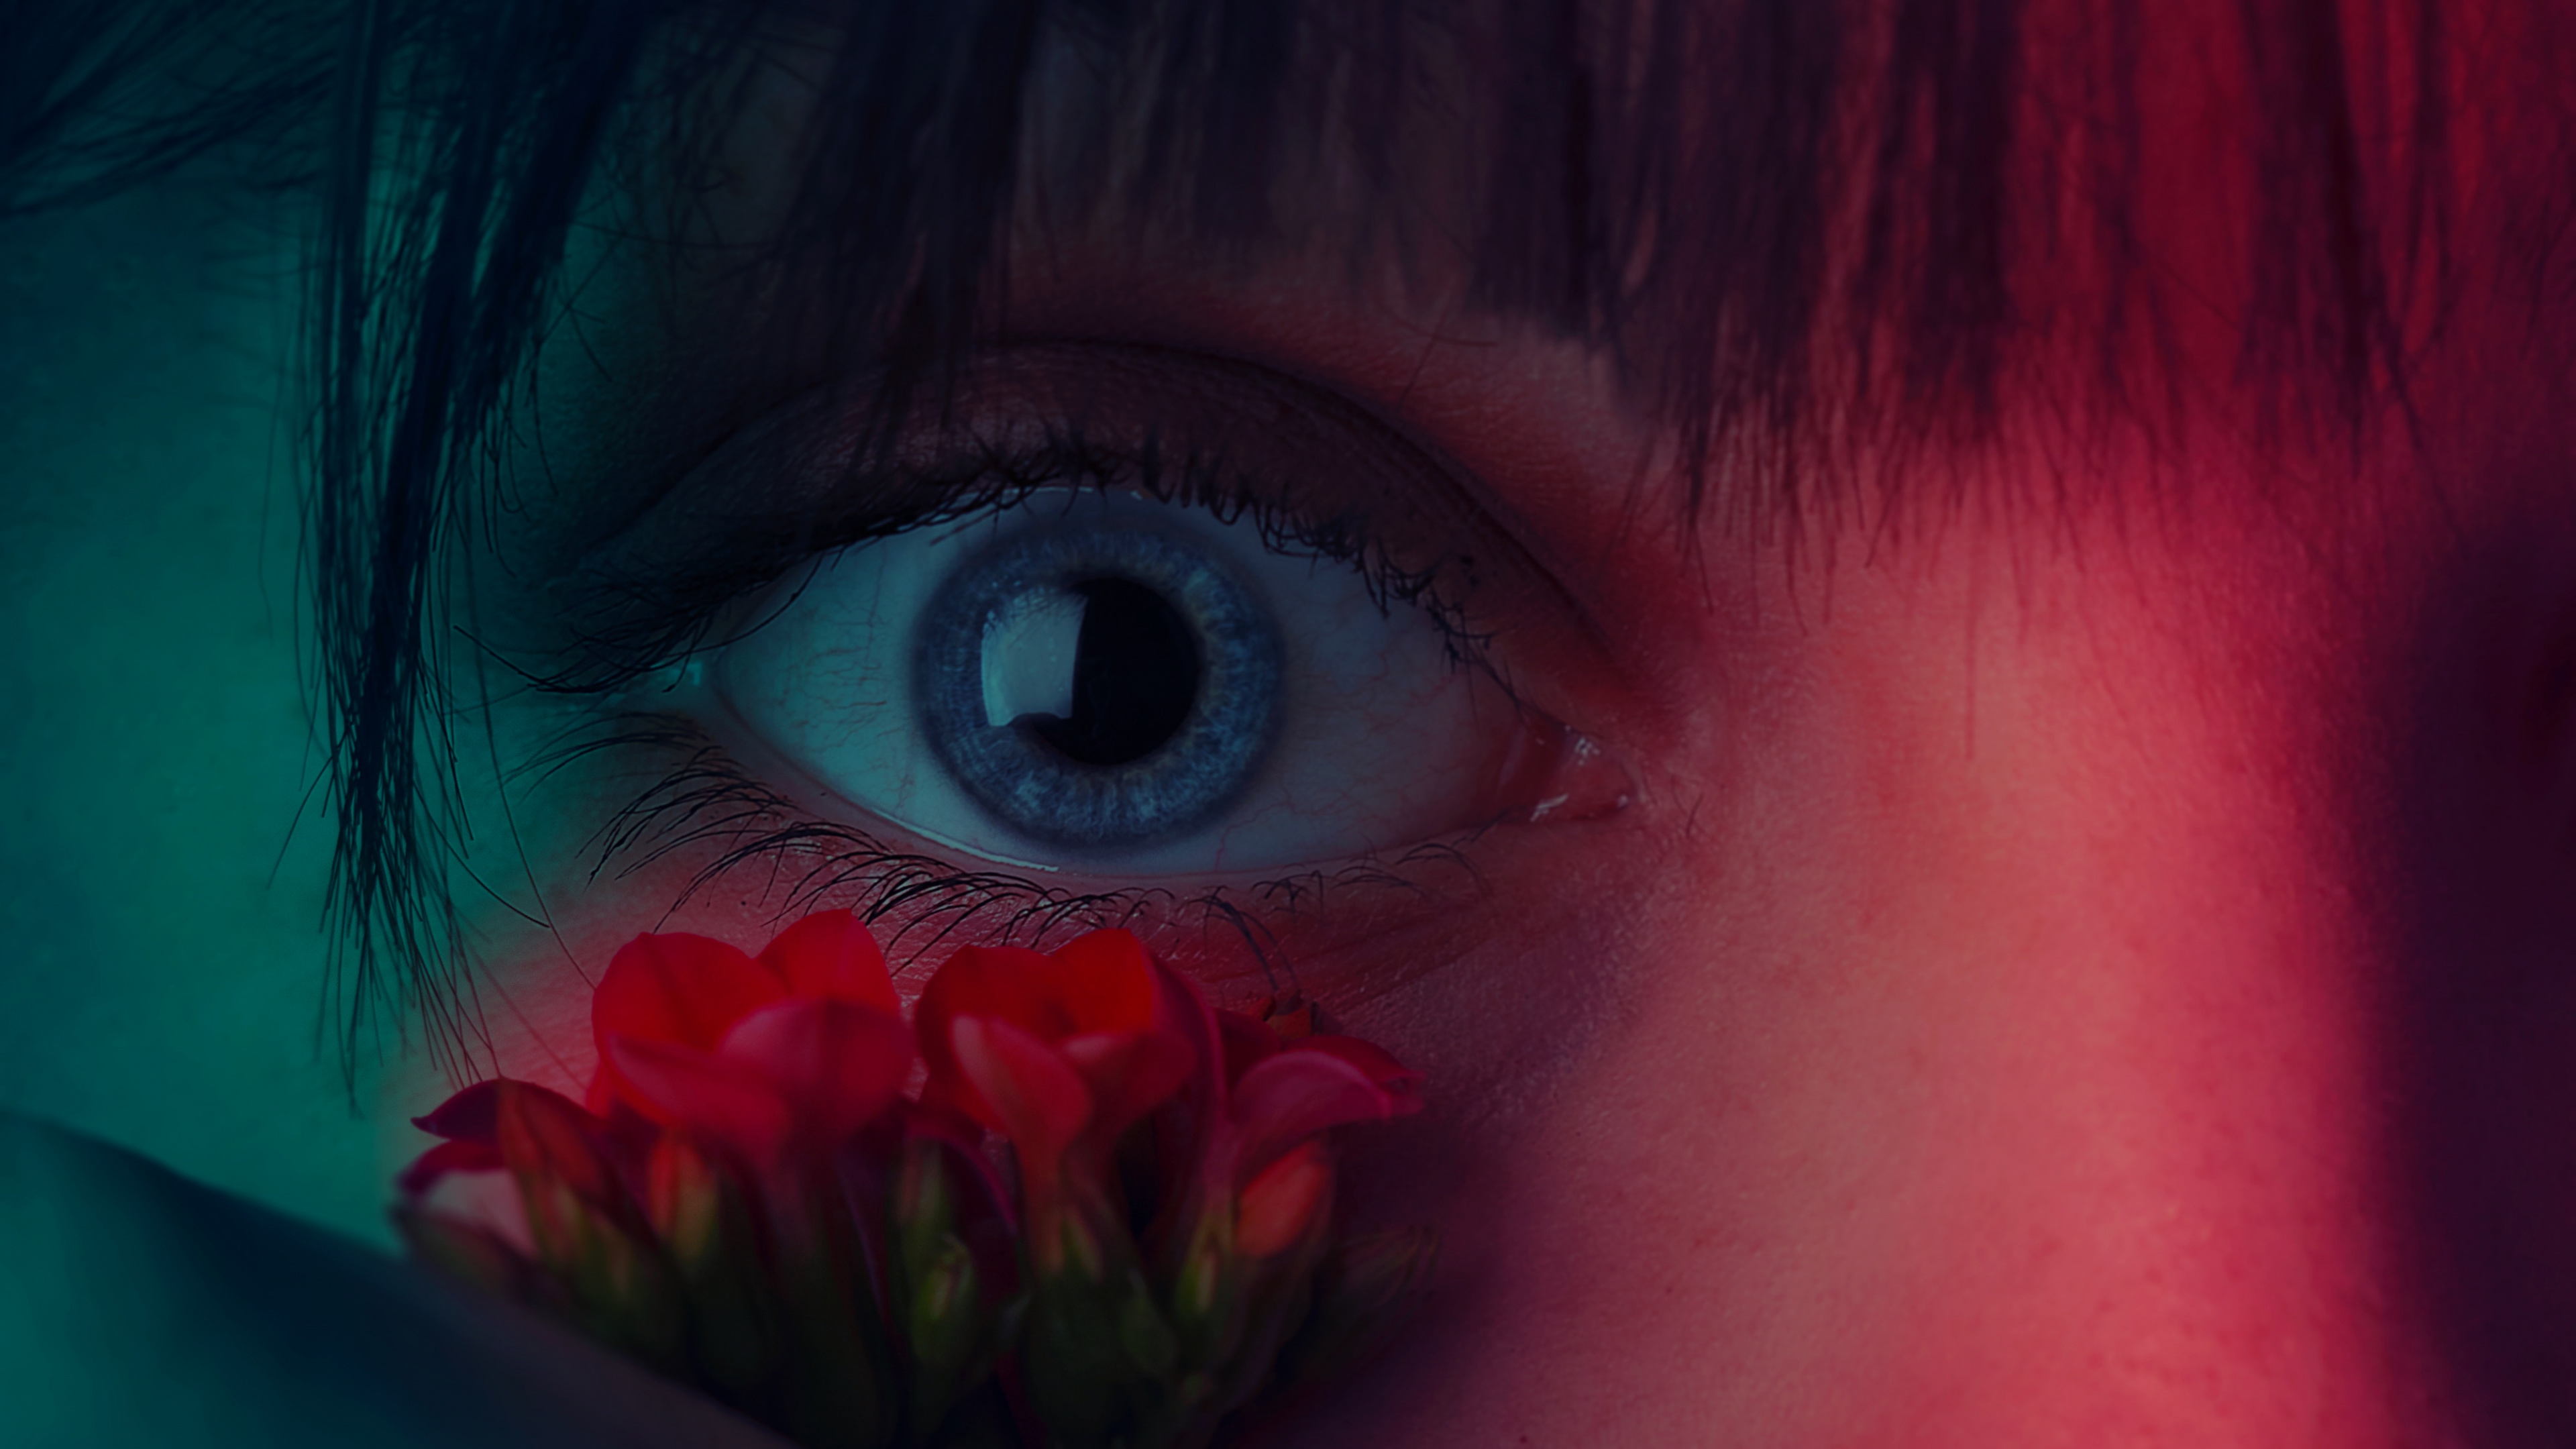 Girl With Red Flower on Her Face. Wallpaper in 3840x2160 Resolution